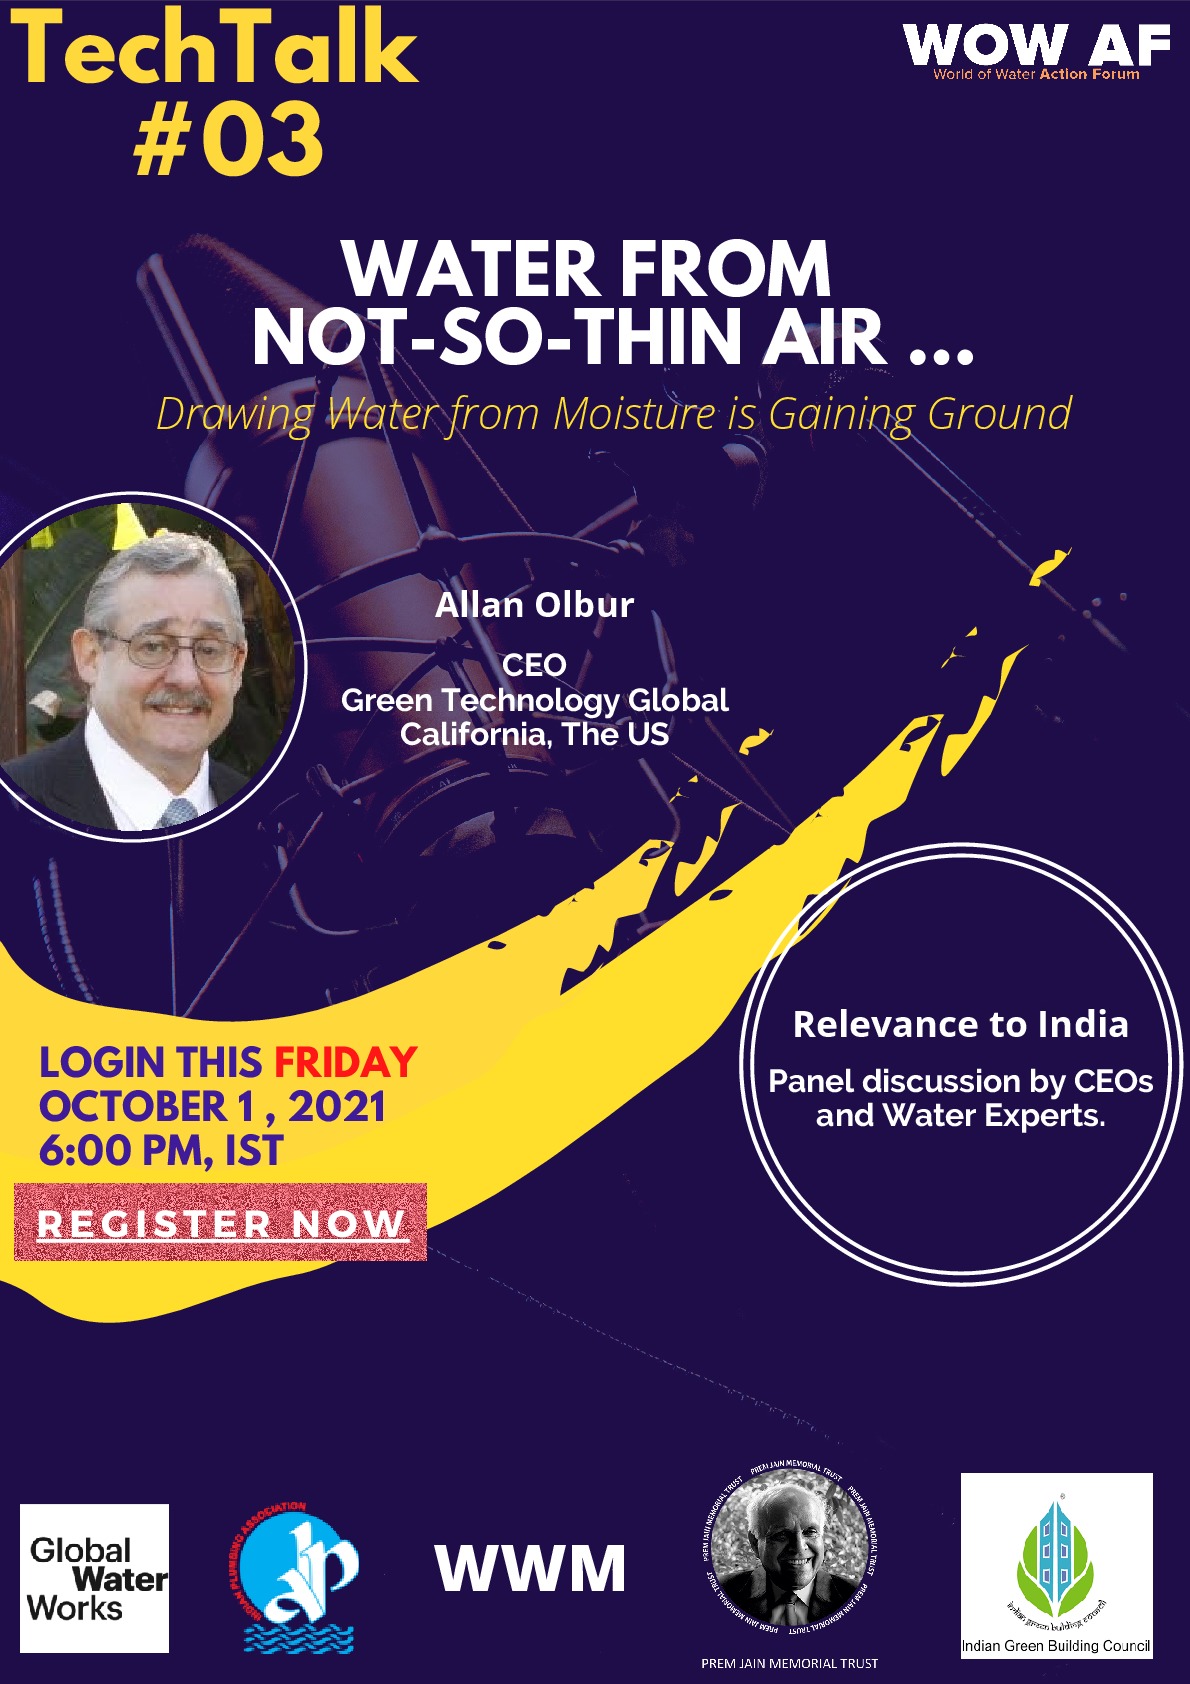 This Friday I will be presenting to a community of interested users in India at 6PM local time.Visit Global Water Works Community and register t...